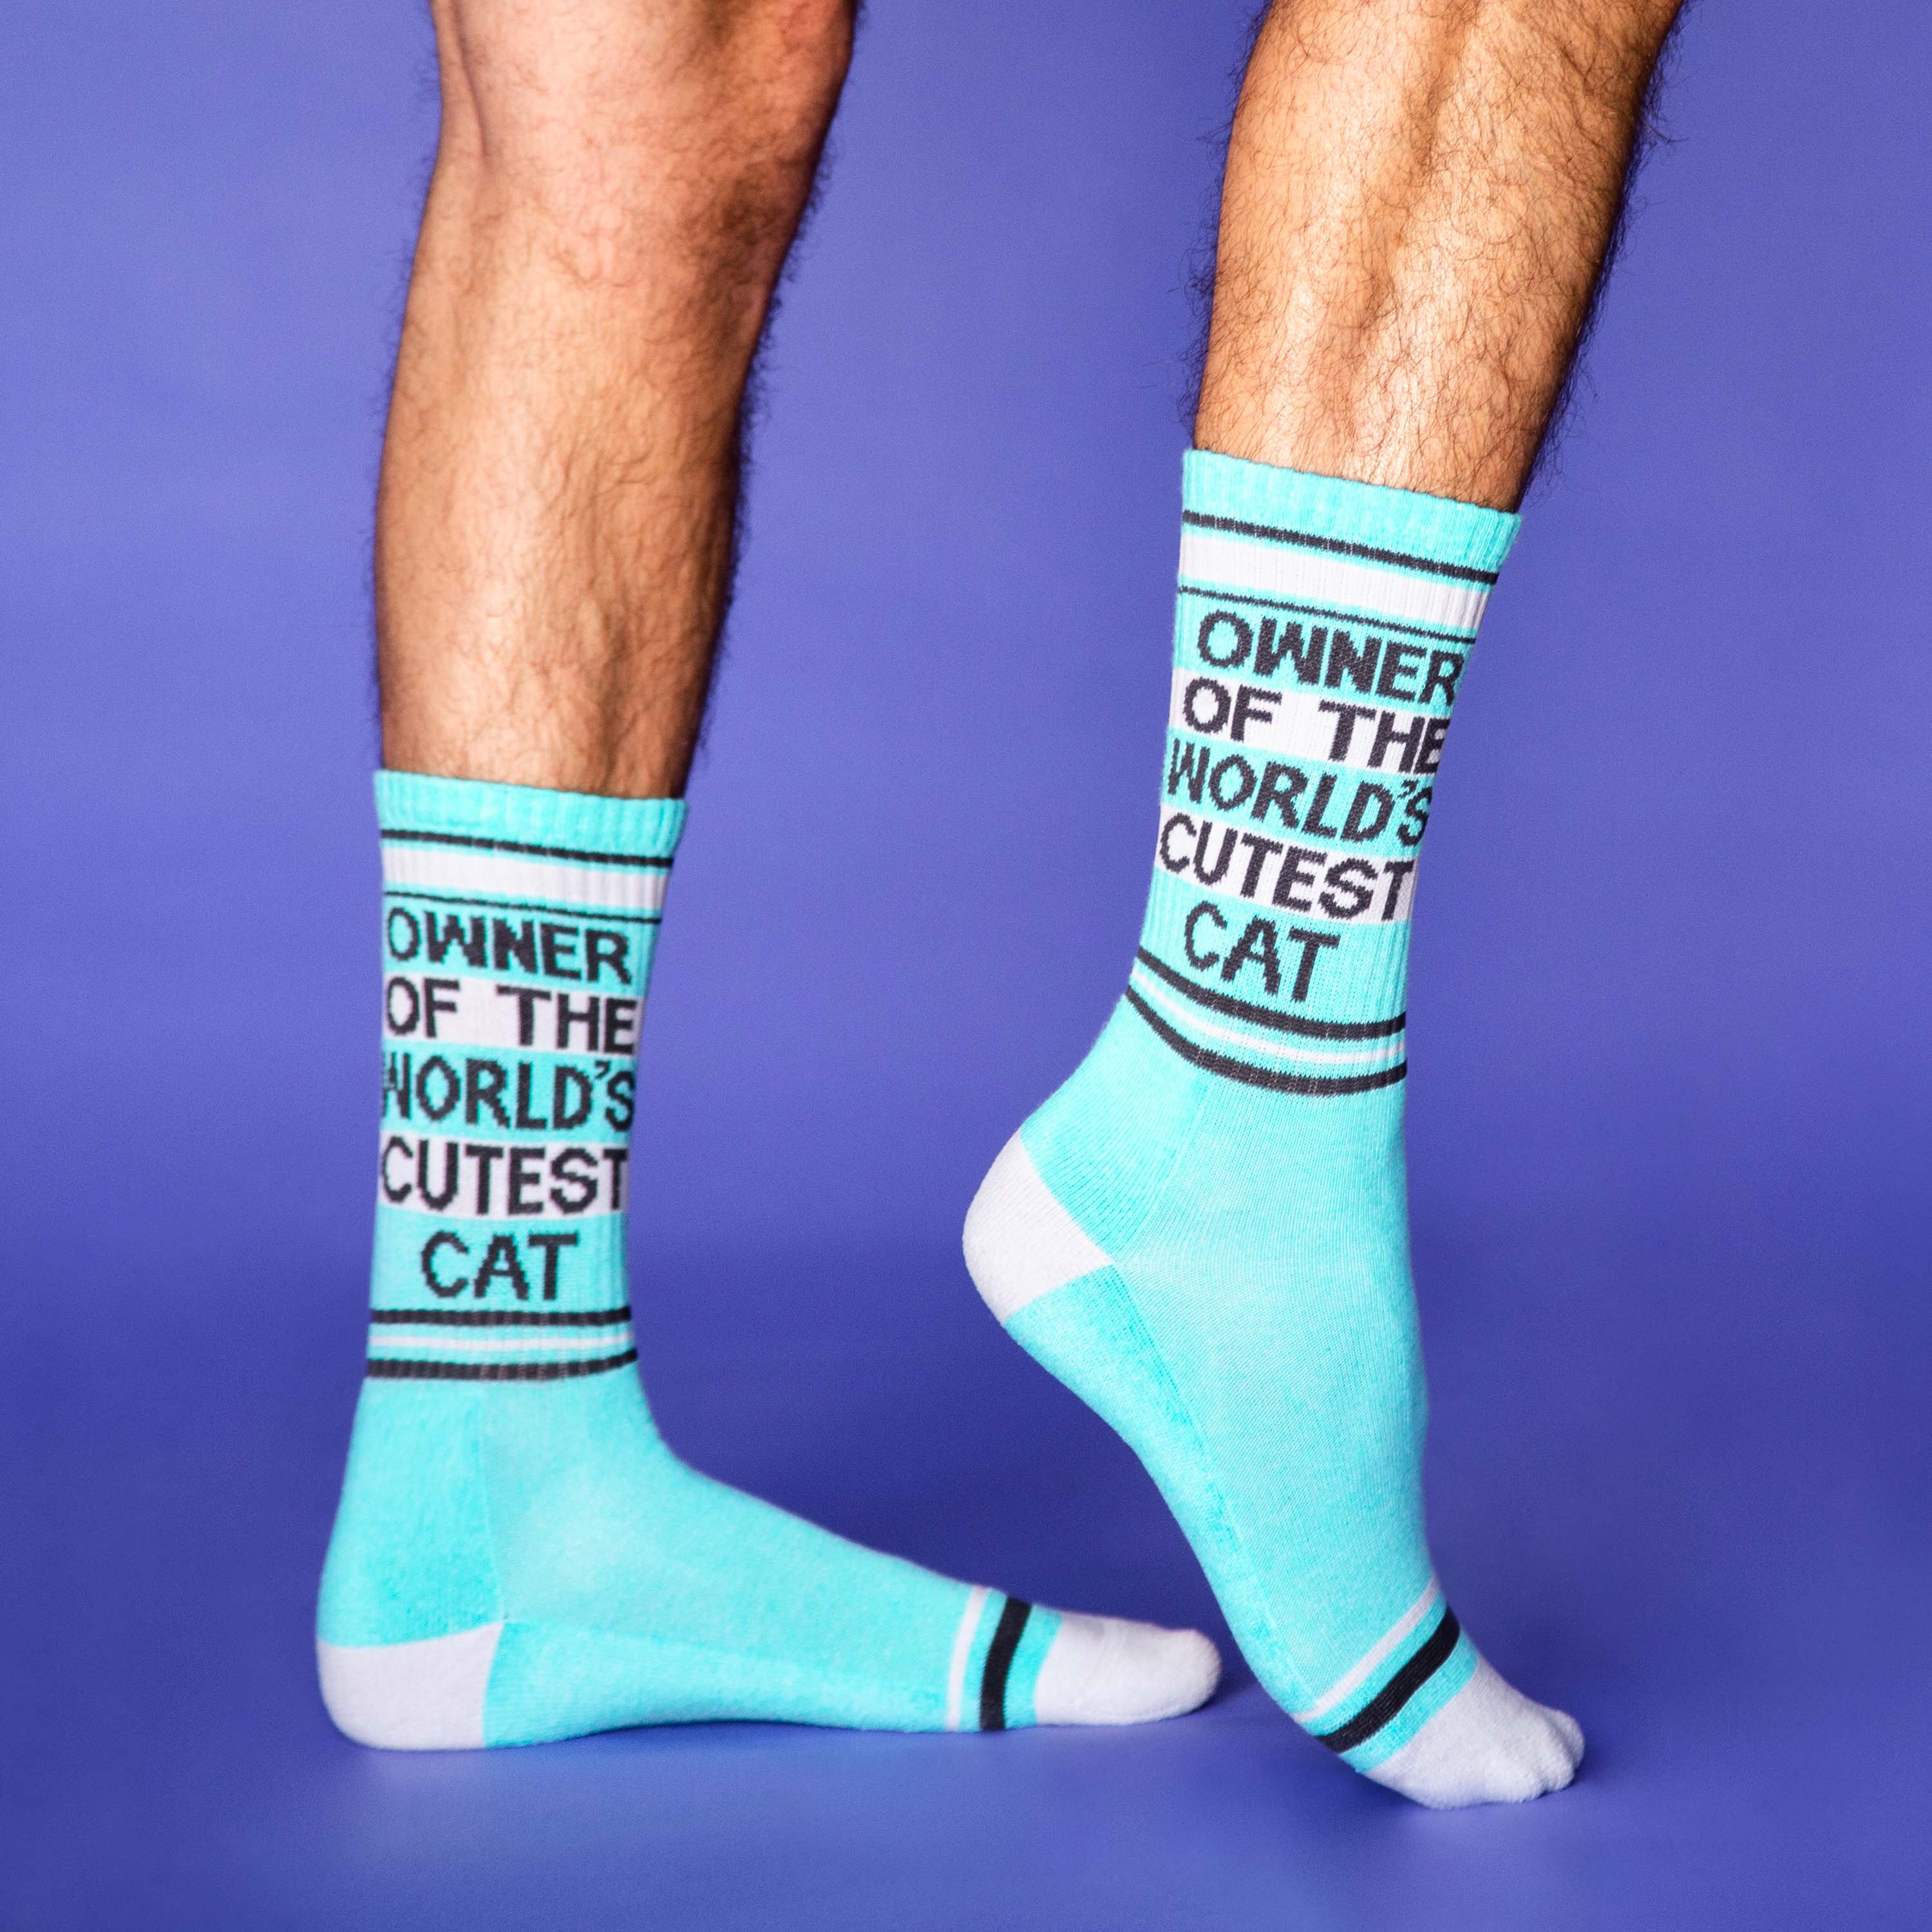 Gumball Poodle - Owner Of The World's Cutest Dog Gym Crew Socks